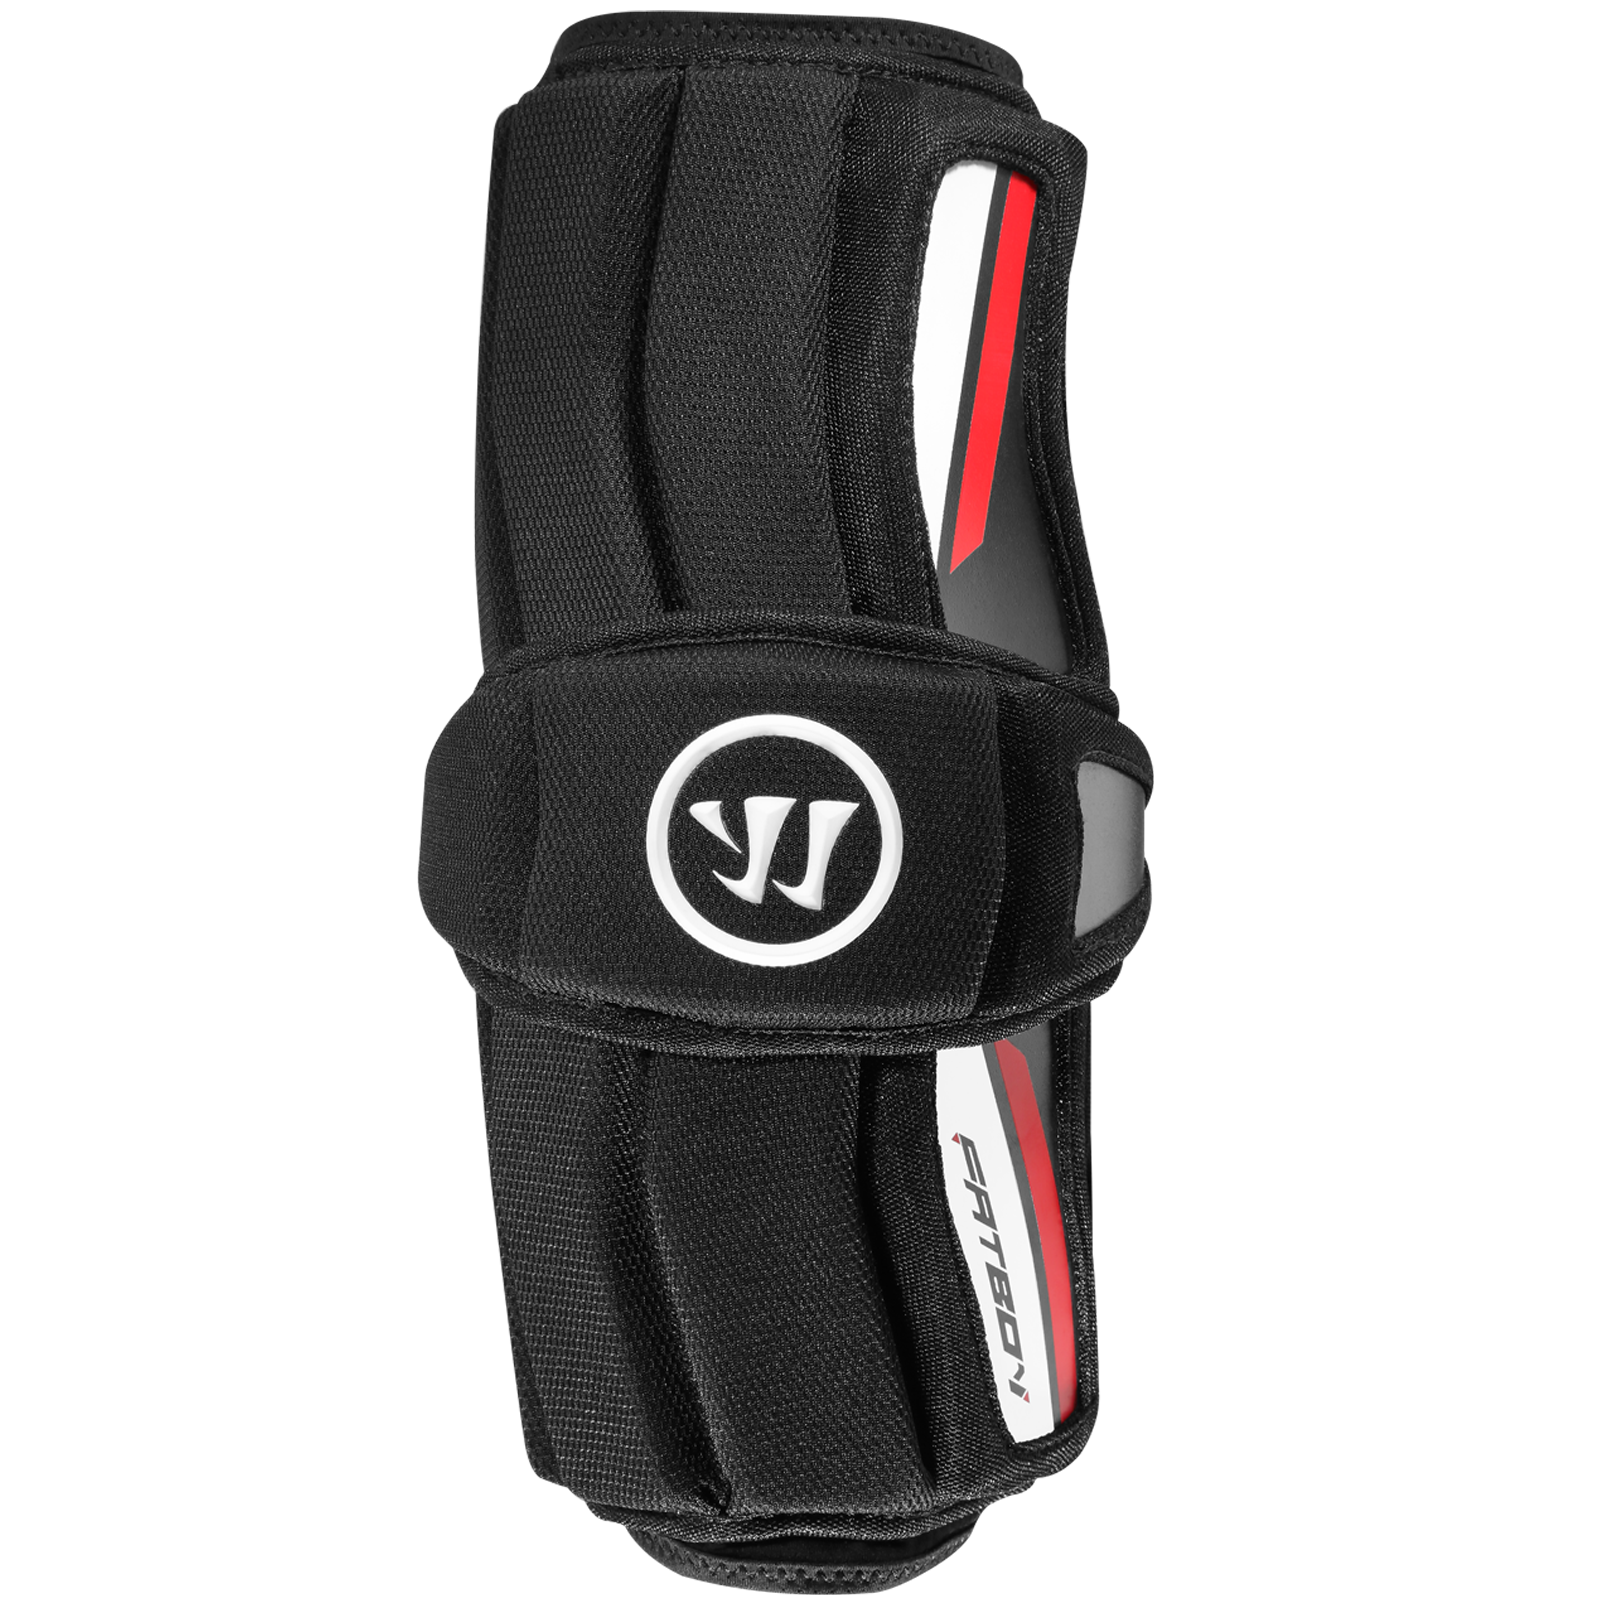 Warrior Burn Next Lacrosse Youth Arm Pads